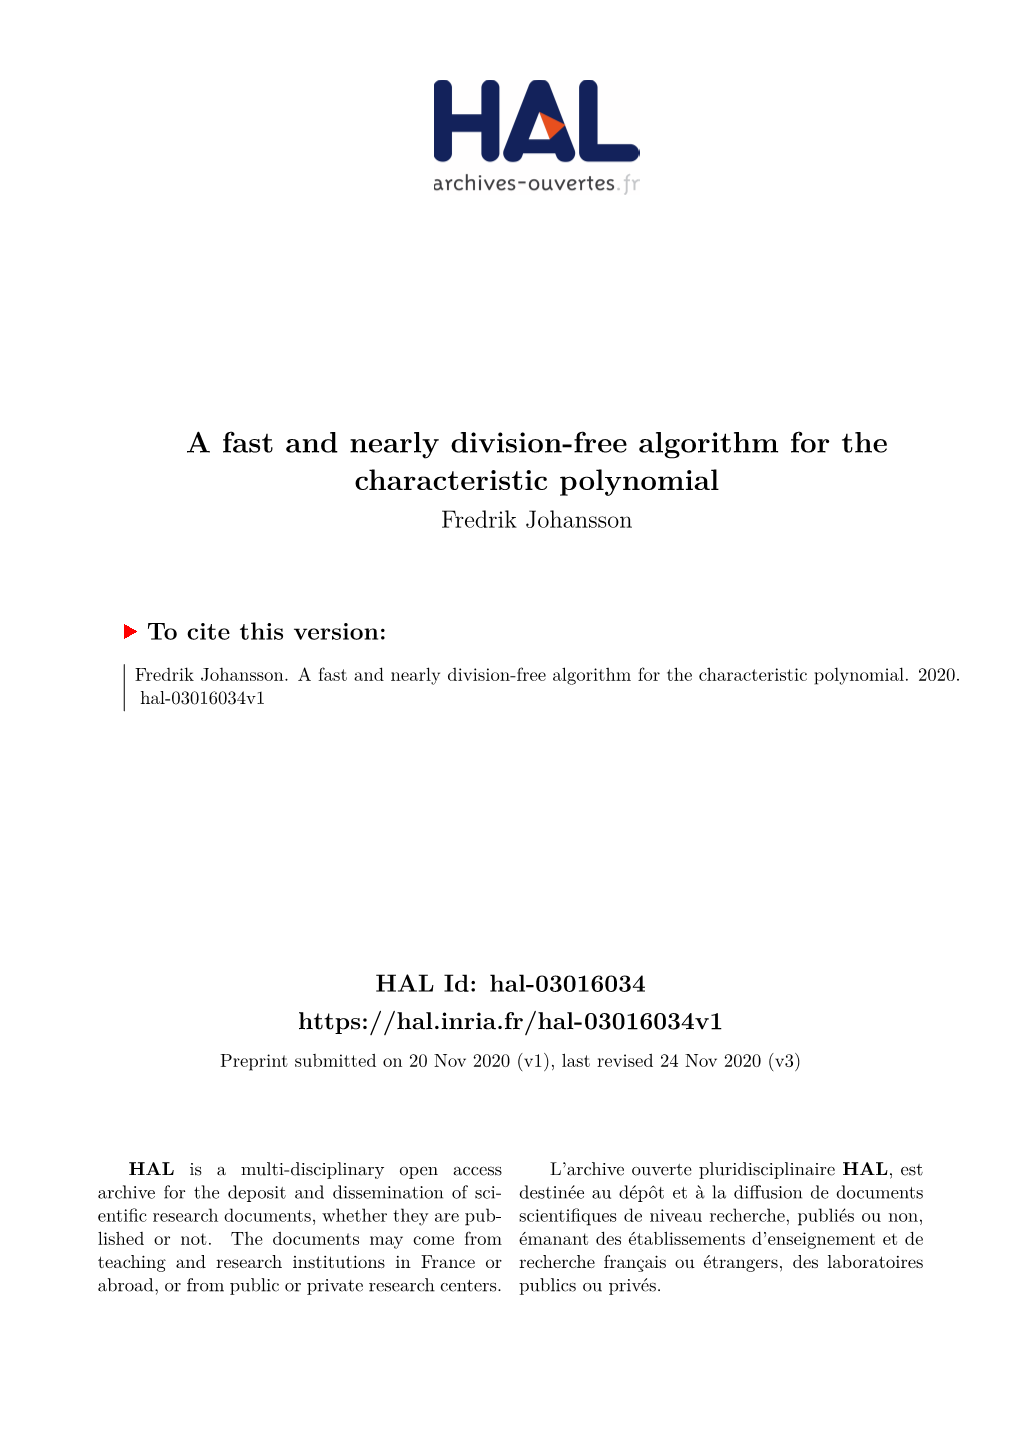 A Fast and Nearly Division-Free Algorithm for the Characteristic Polynomial Fredrik Johansson